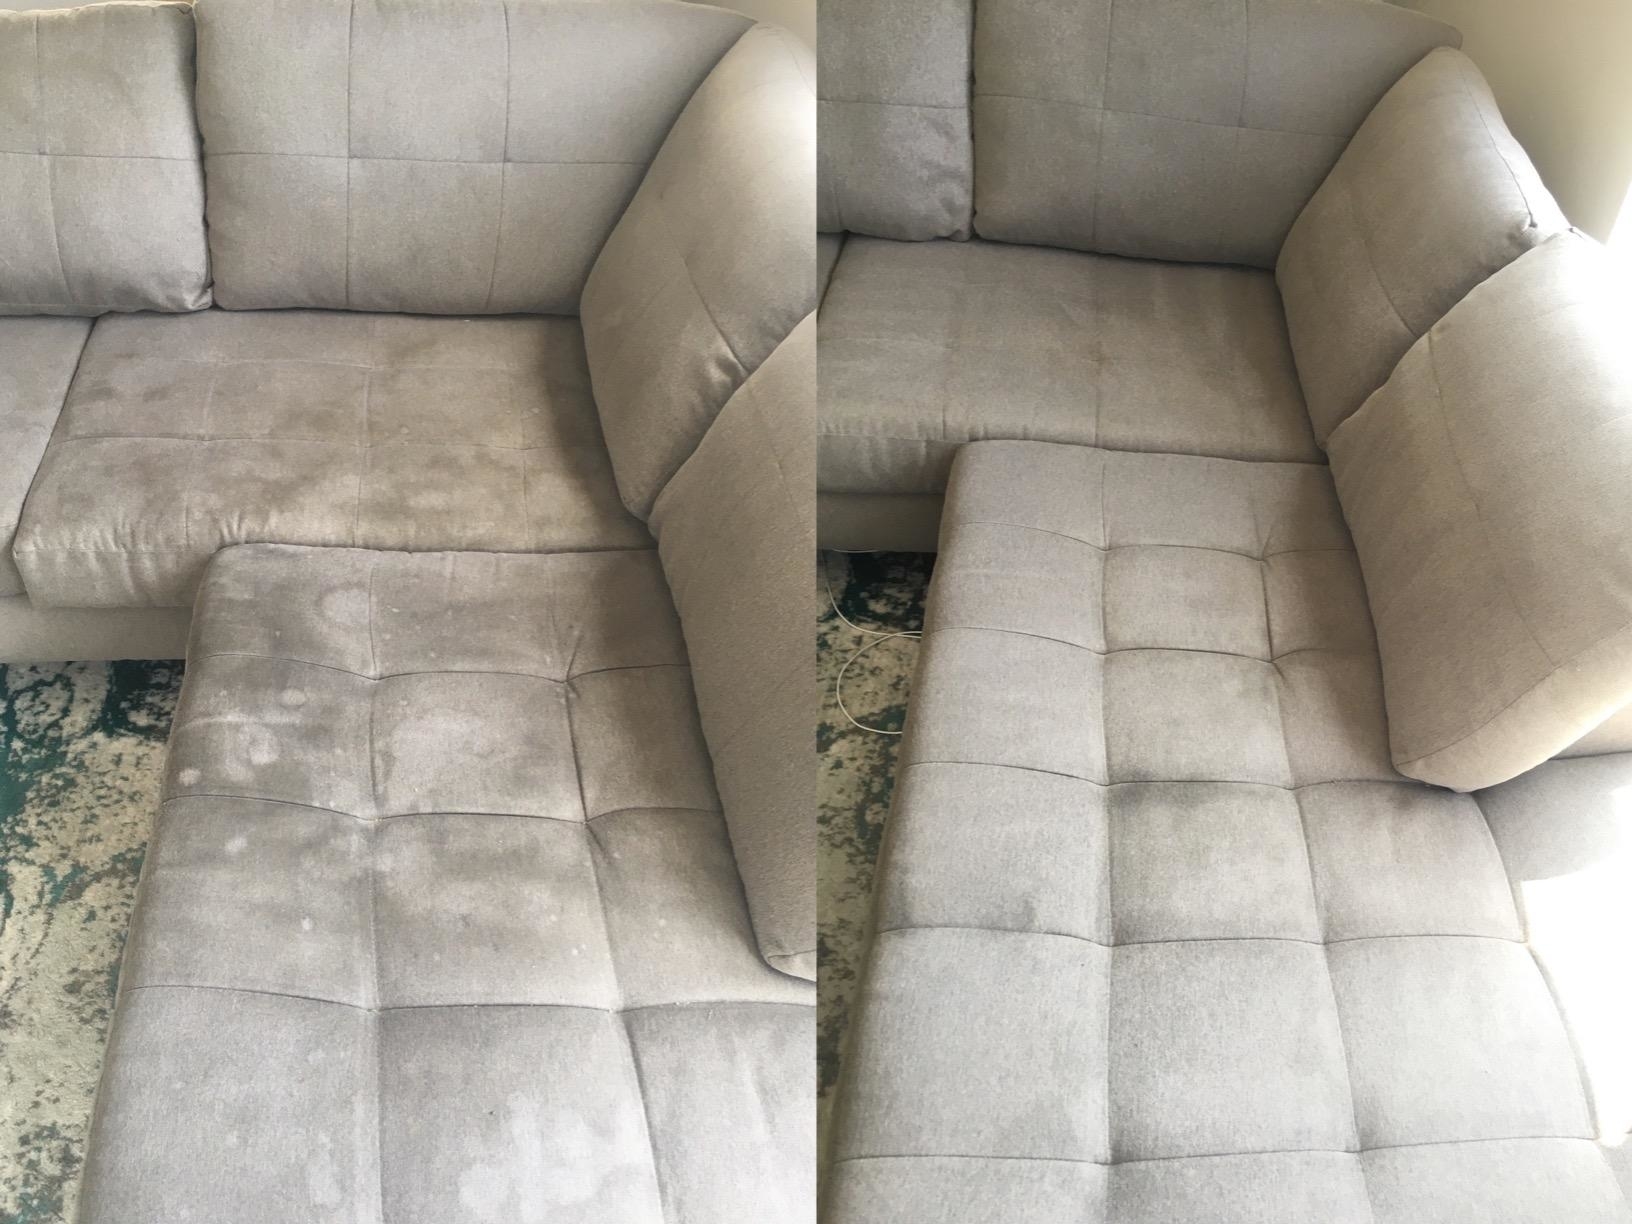 A reviewer&#x27;s before and after photo of their couch which was once stained and splotched and is now free of marks after using the machine